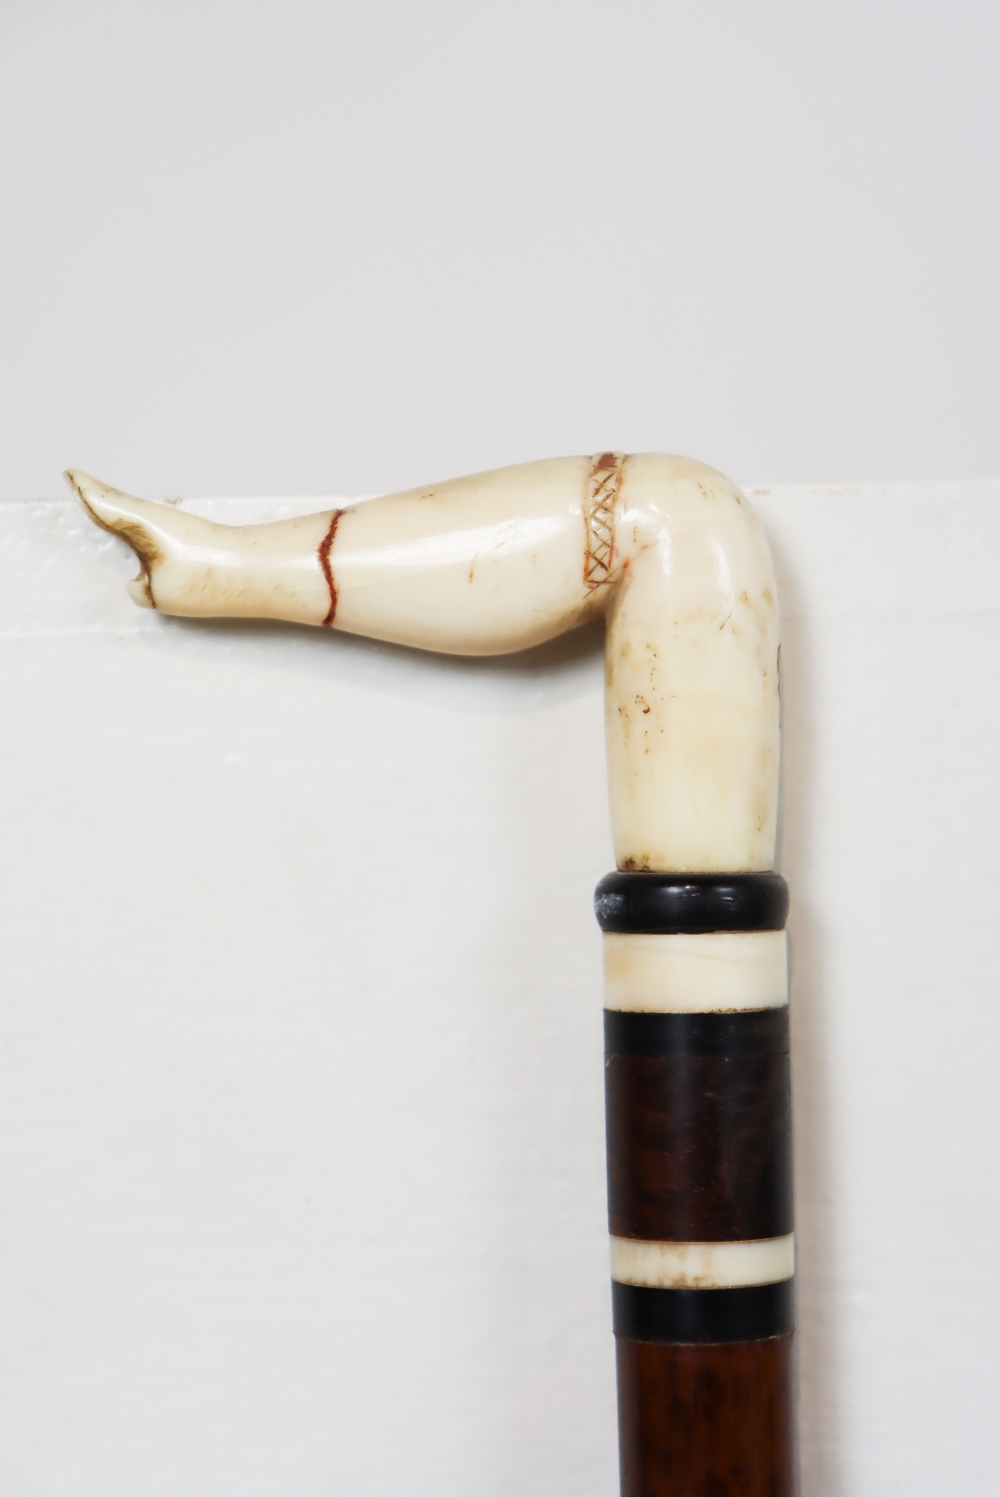 19th C. Whale Bone Boot Handle Cane - Image 7 of 7